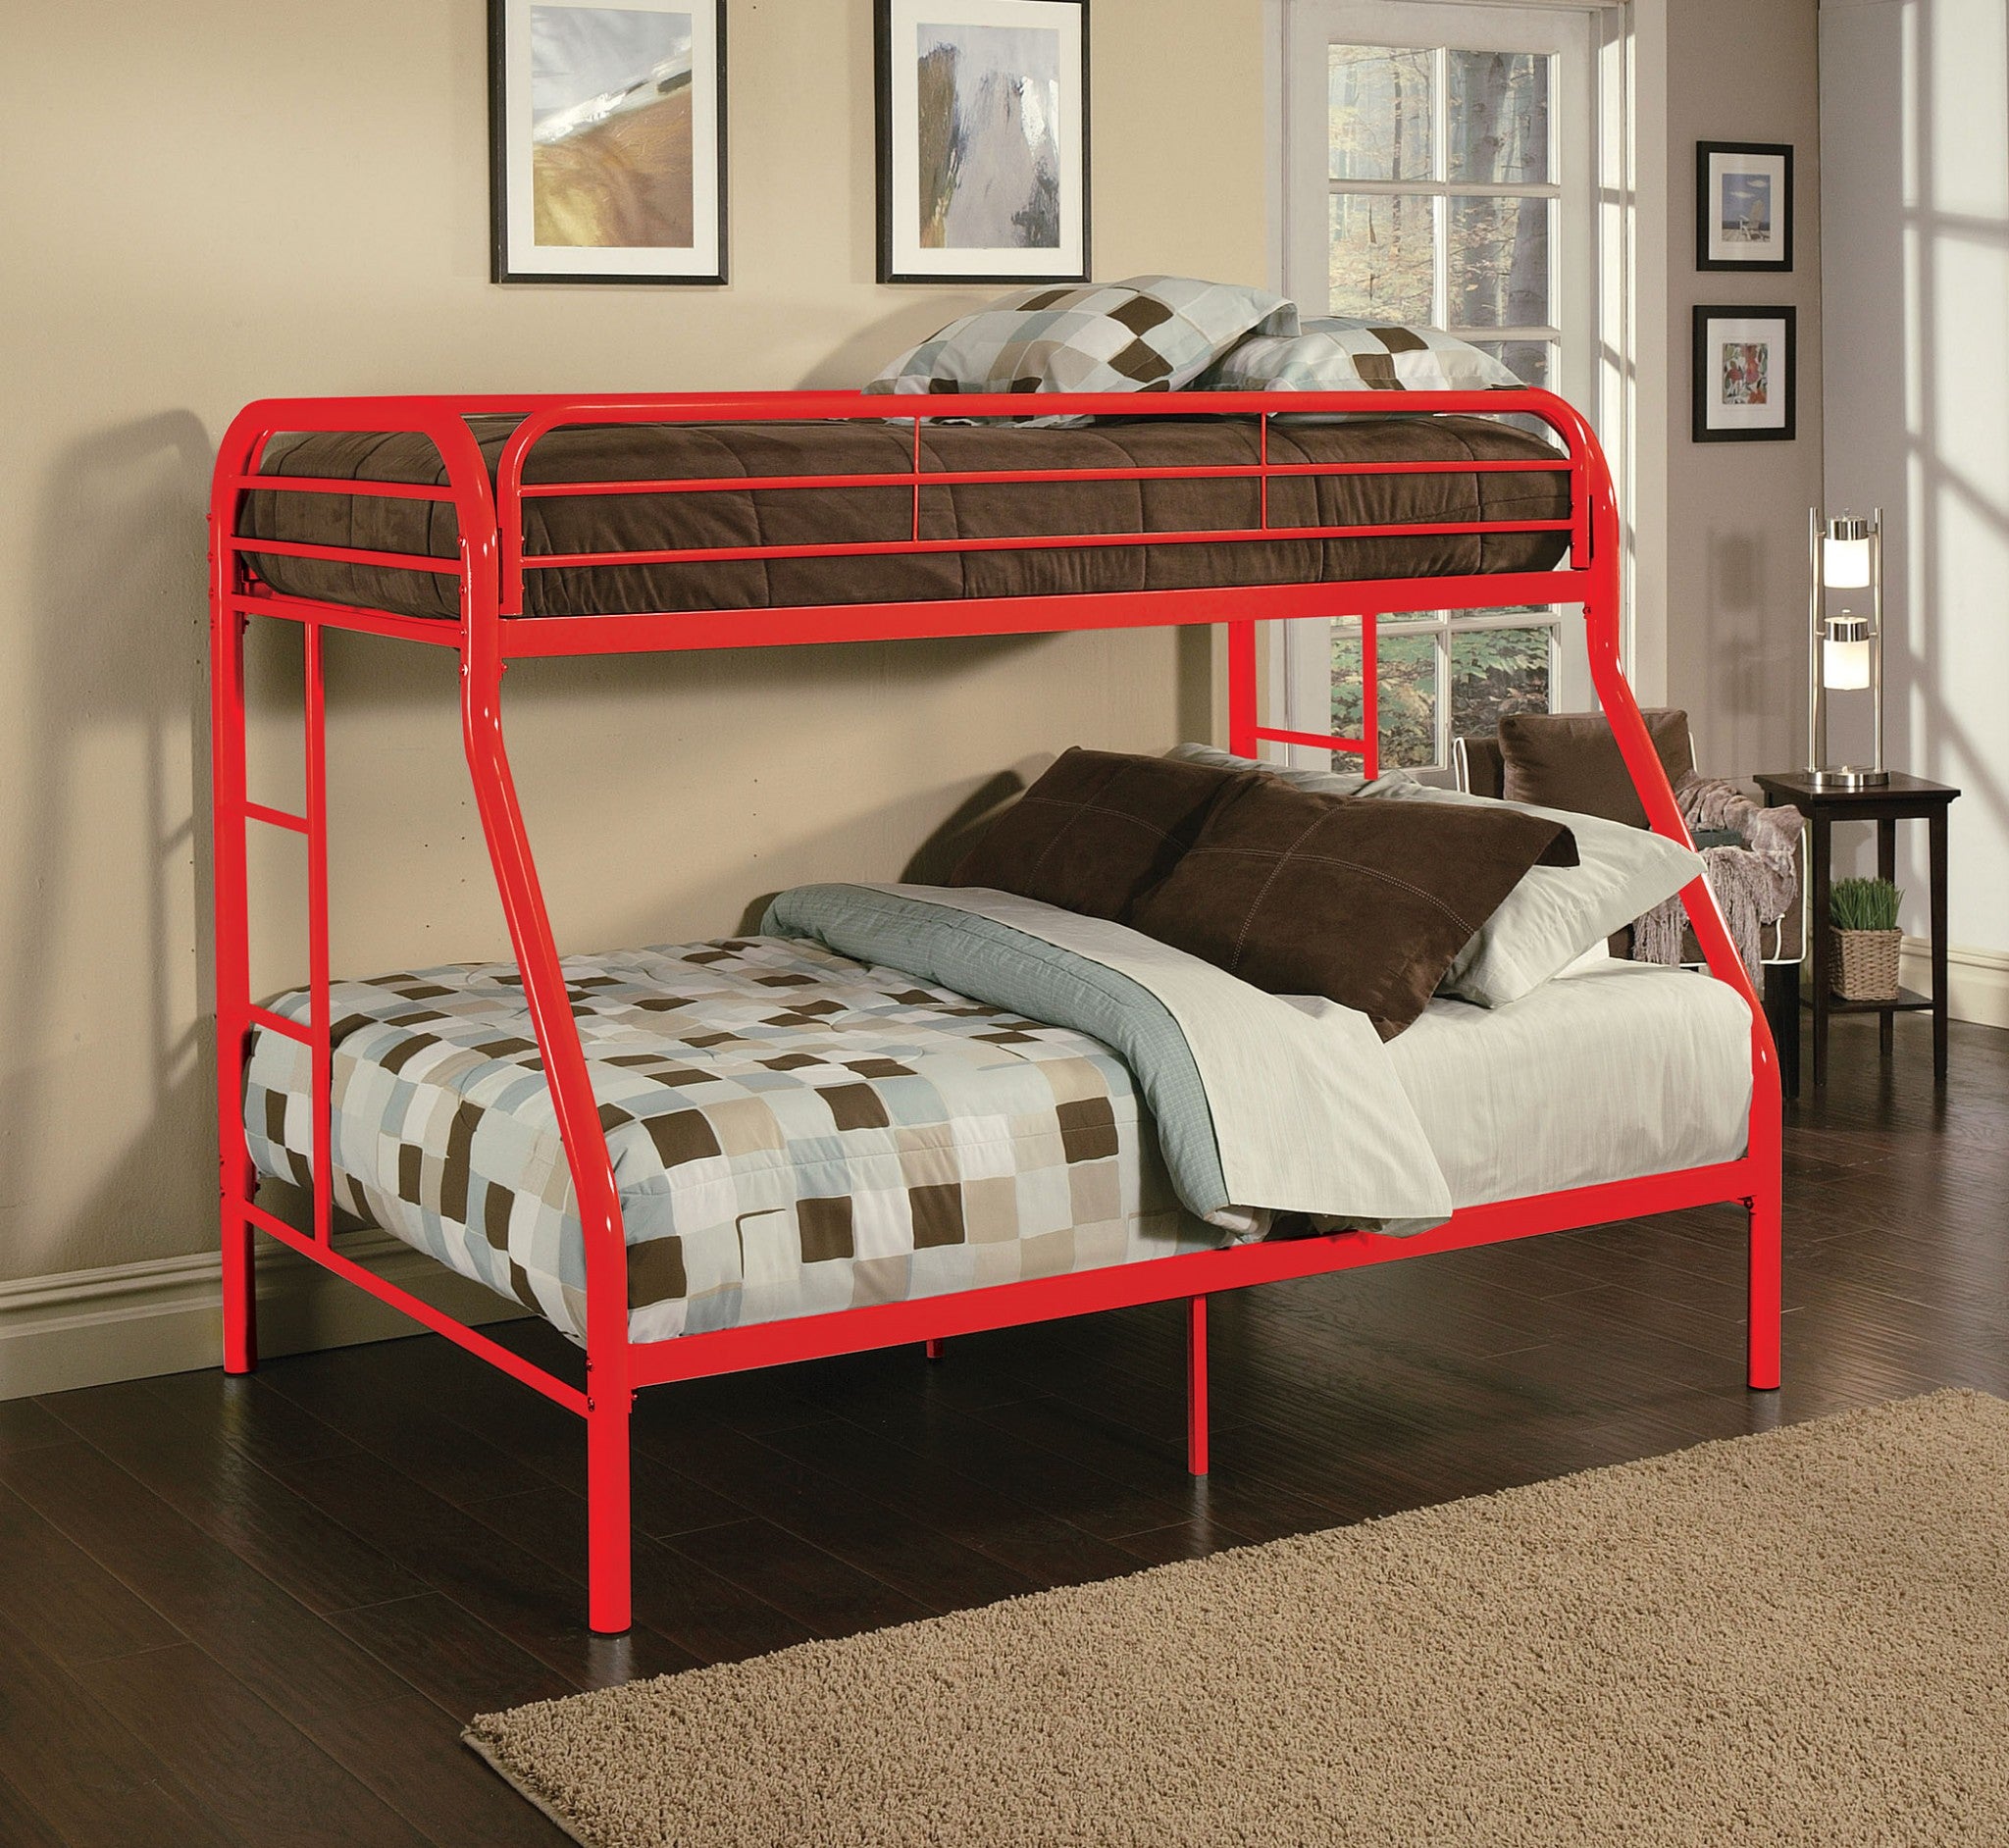 78" X 54" X 60" Twin Over Full Red Metal Tube Bunk Bed Default Title